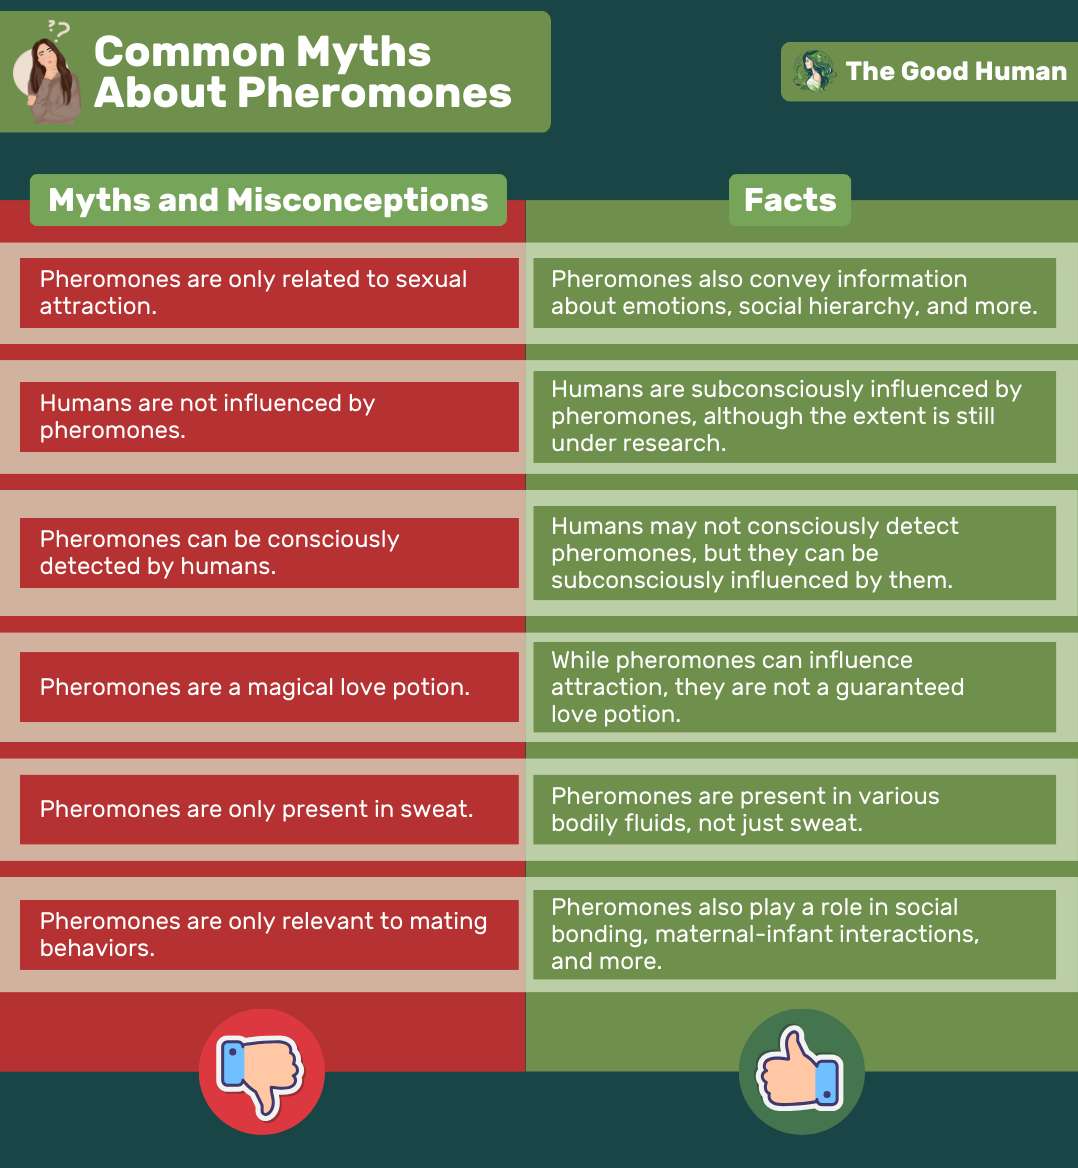 Common myths and misconceptions about pheromones.